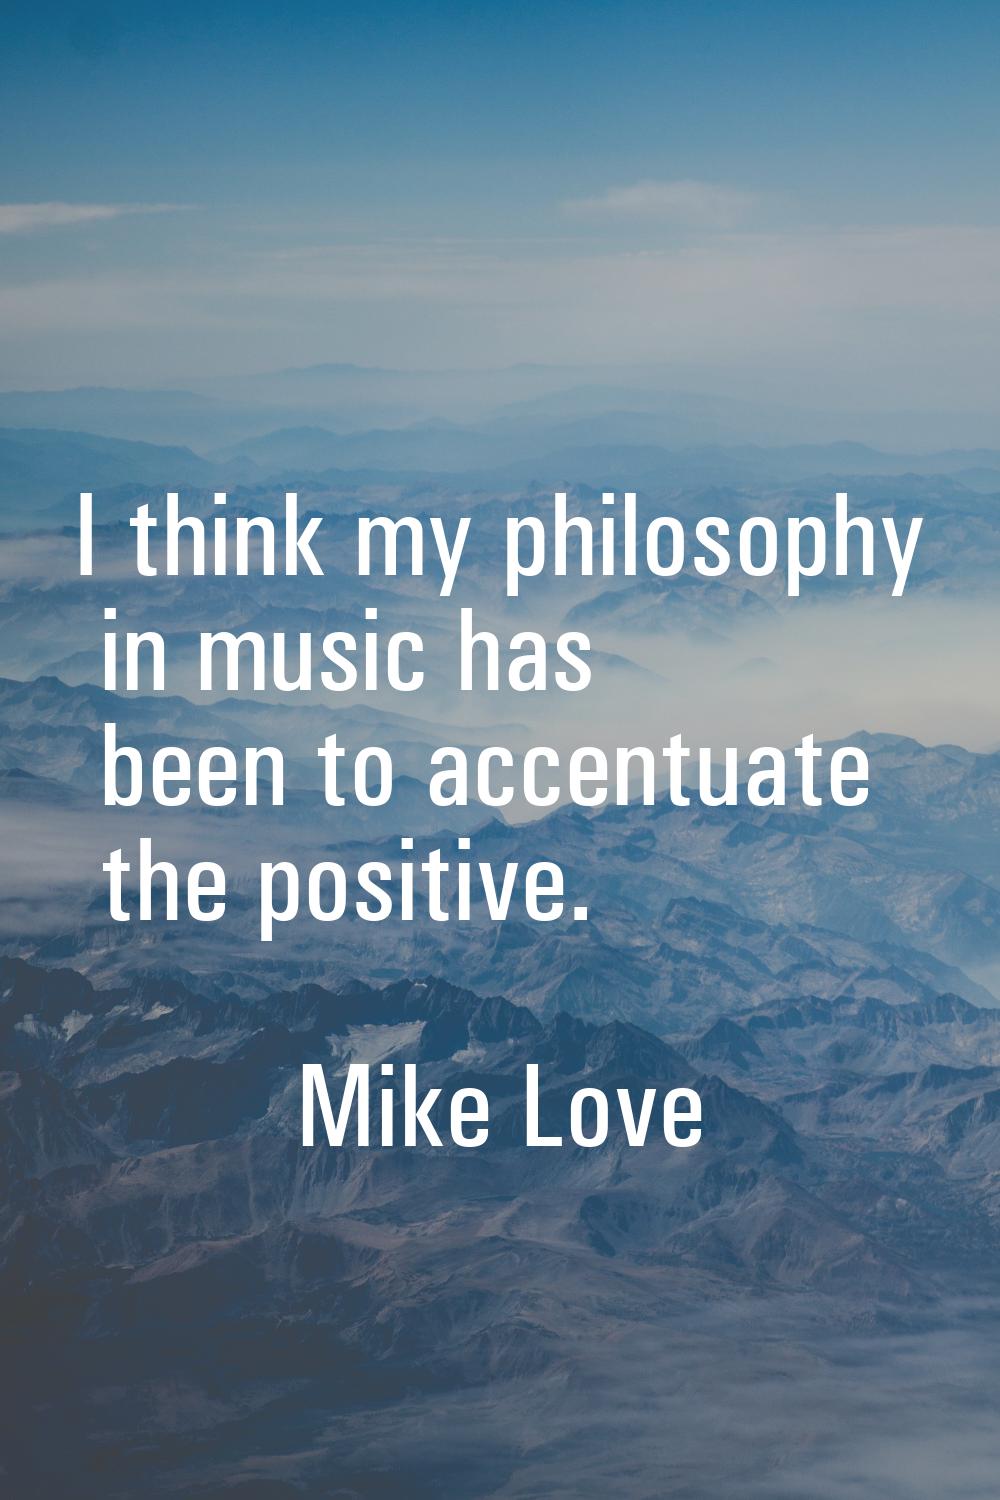 I think my philosophy in music has been to accentuate the positive.